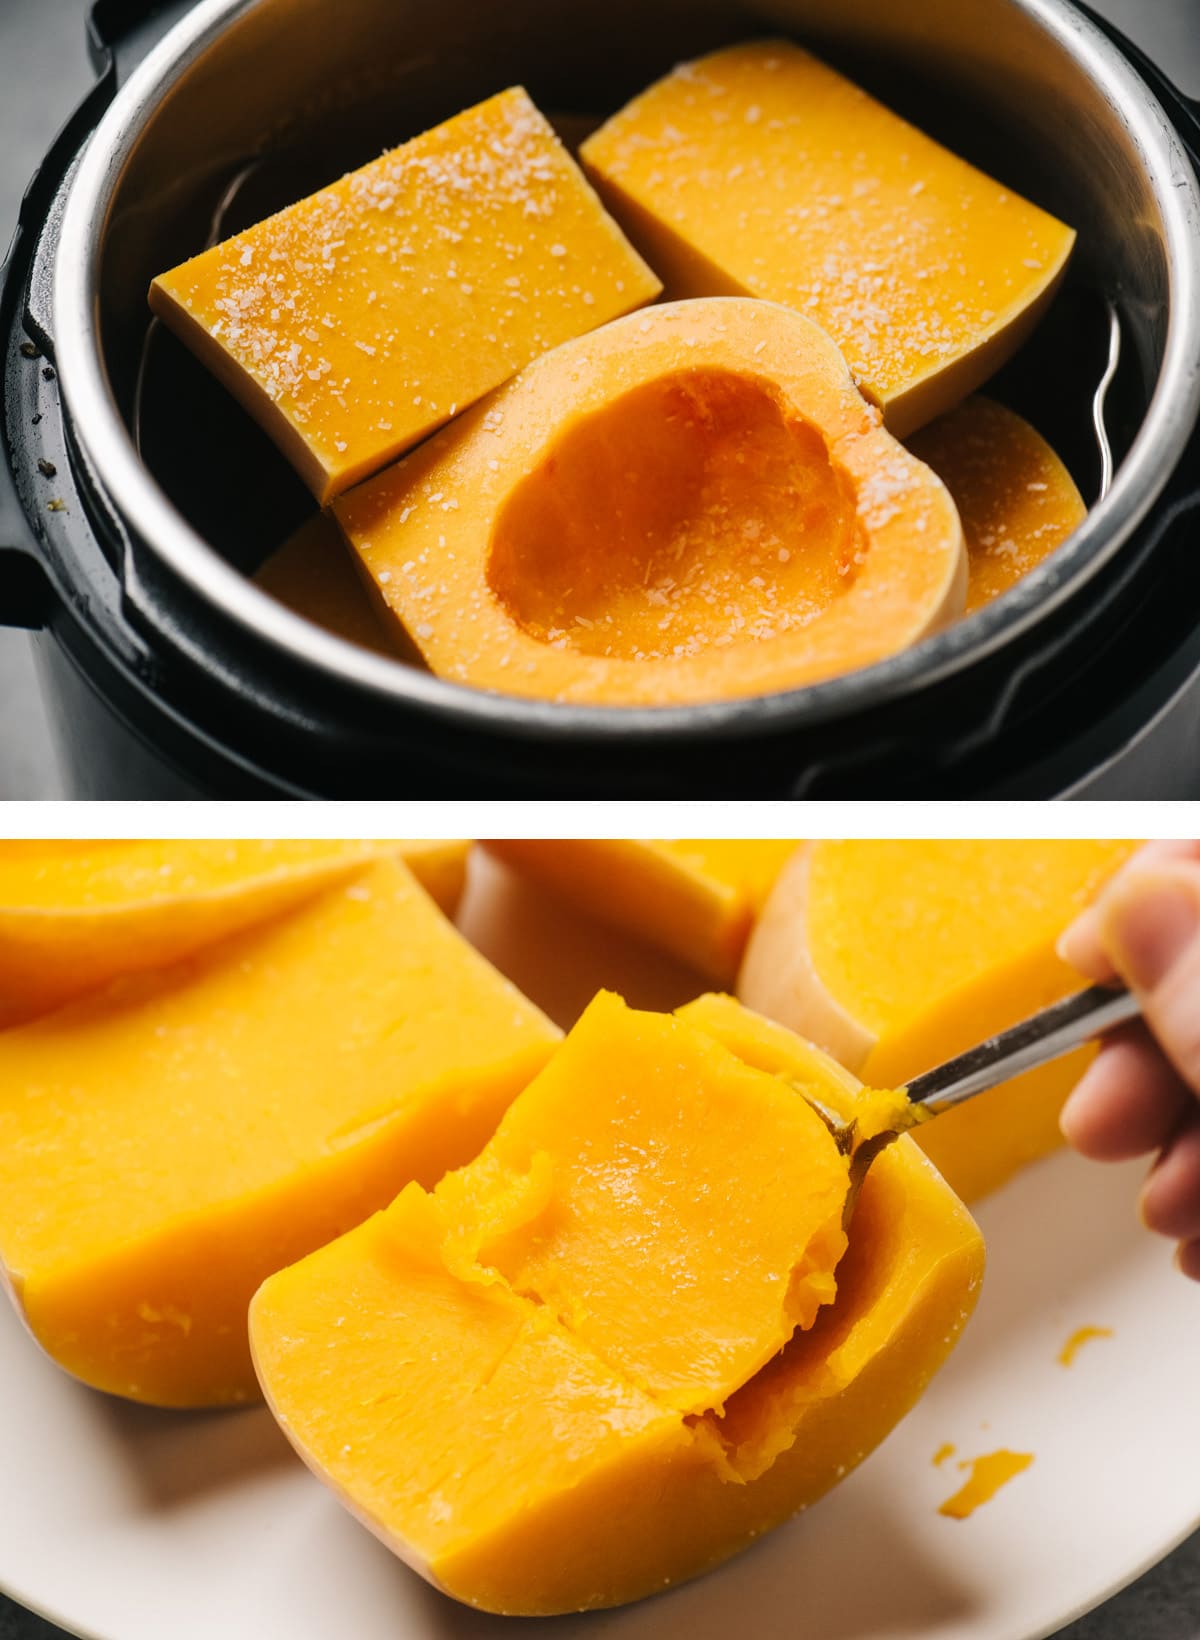 Top - a whole butternut squash cut into fours in and instant pot; bottom - scoop flesh from steamed butternut squash halves.